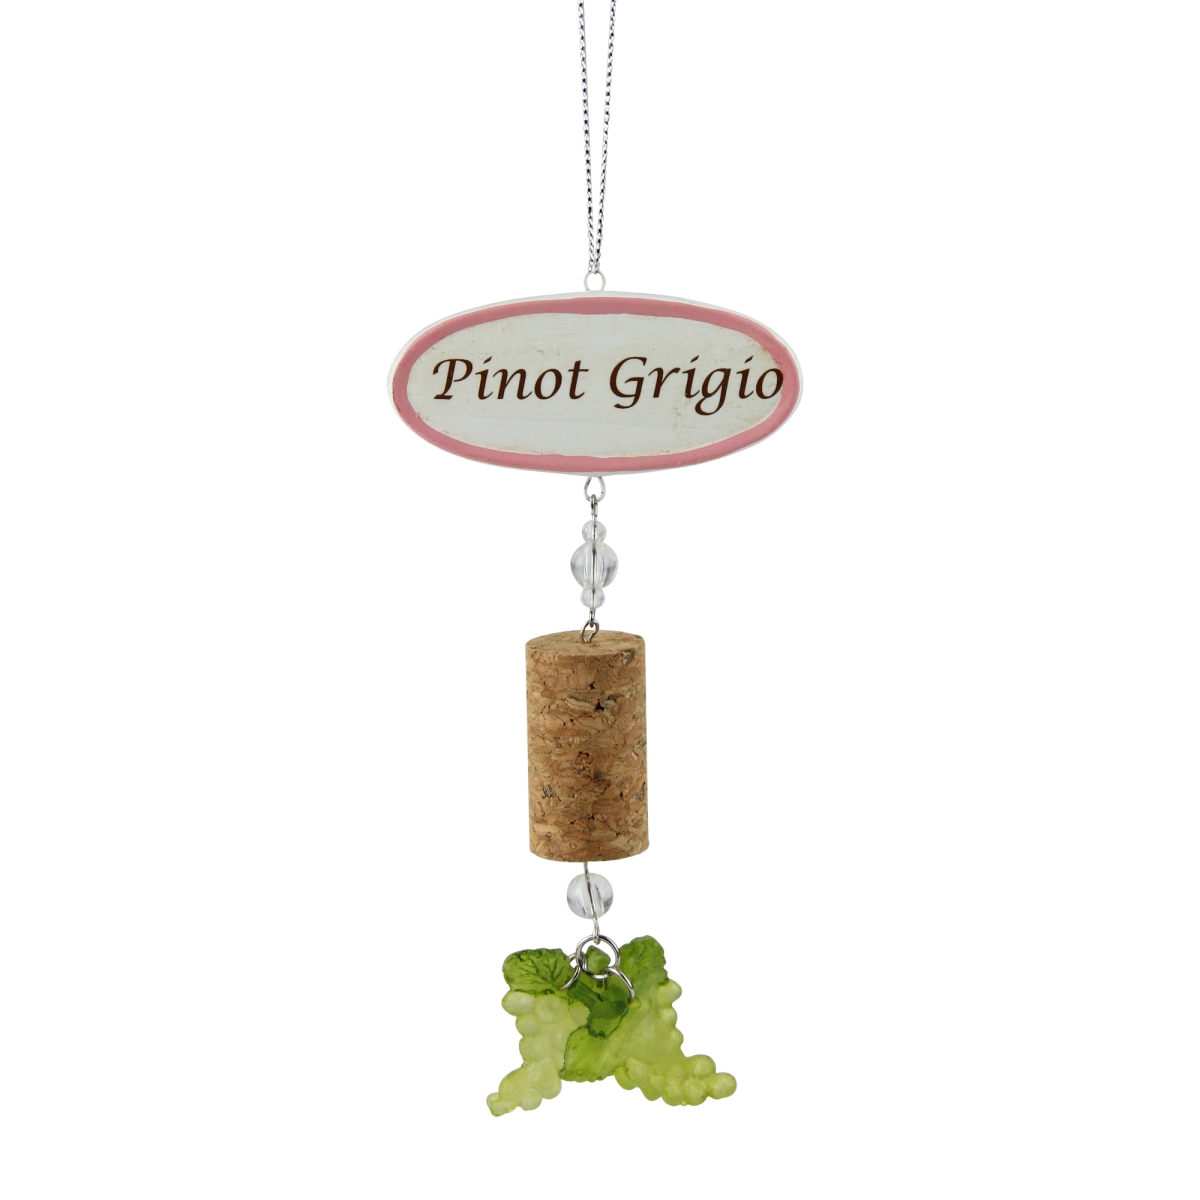 Kurt Adler 30851275 5.5 In. Tuscan Winery Pinot Grigio Sign With Cork & Grapes Christmas Ornament